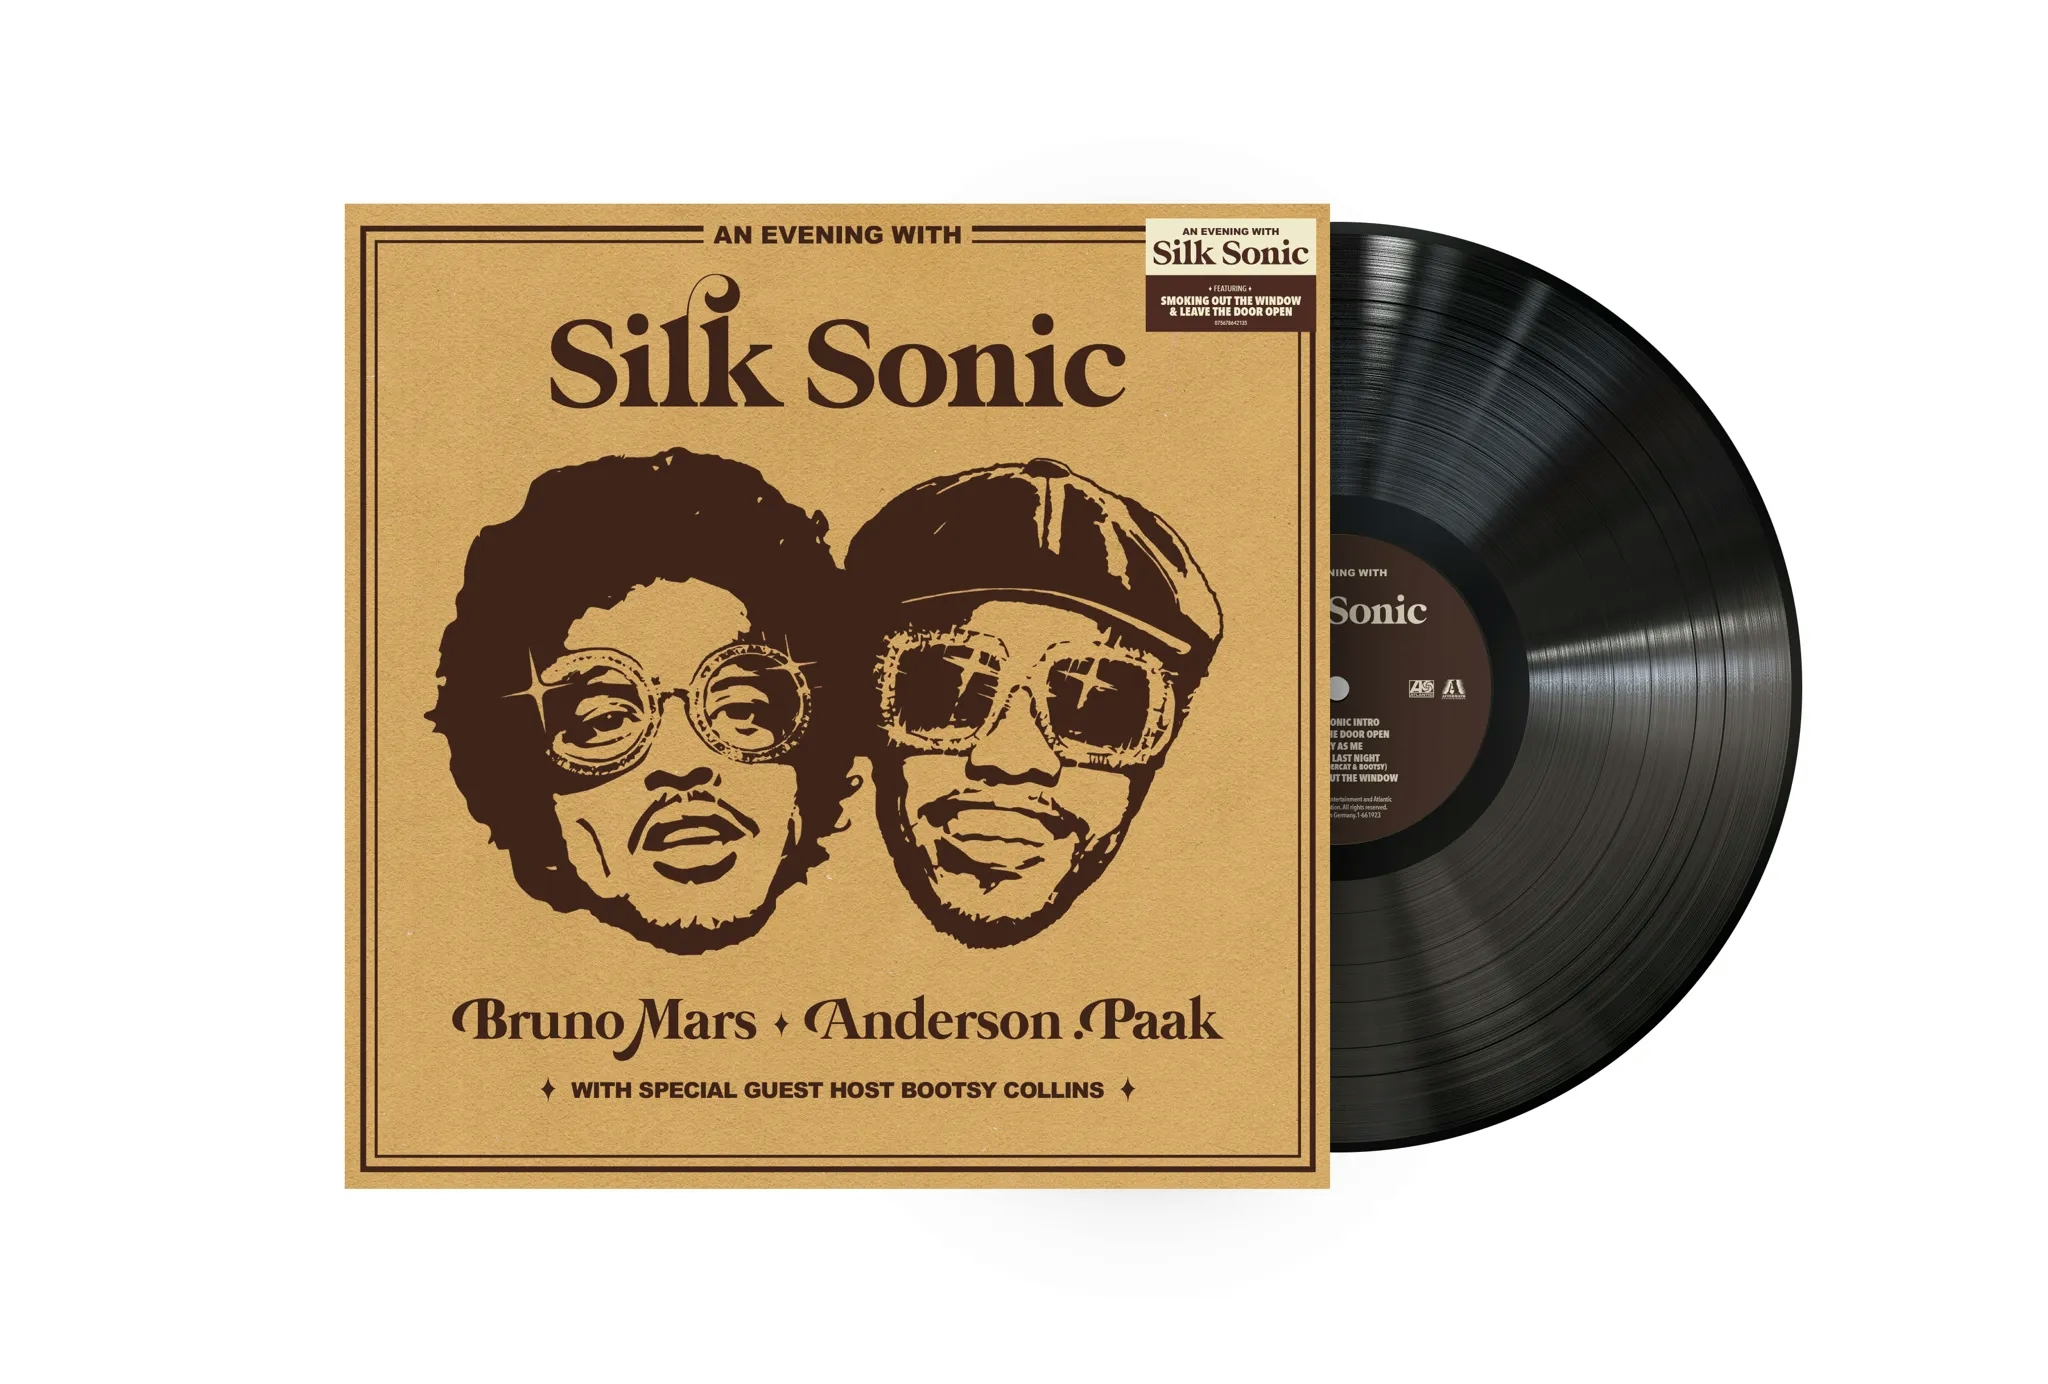 Album artwork for An Evening with Silk Sonic by Bruno Mars, Anderson .Paak